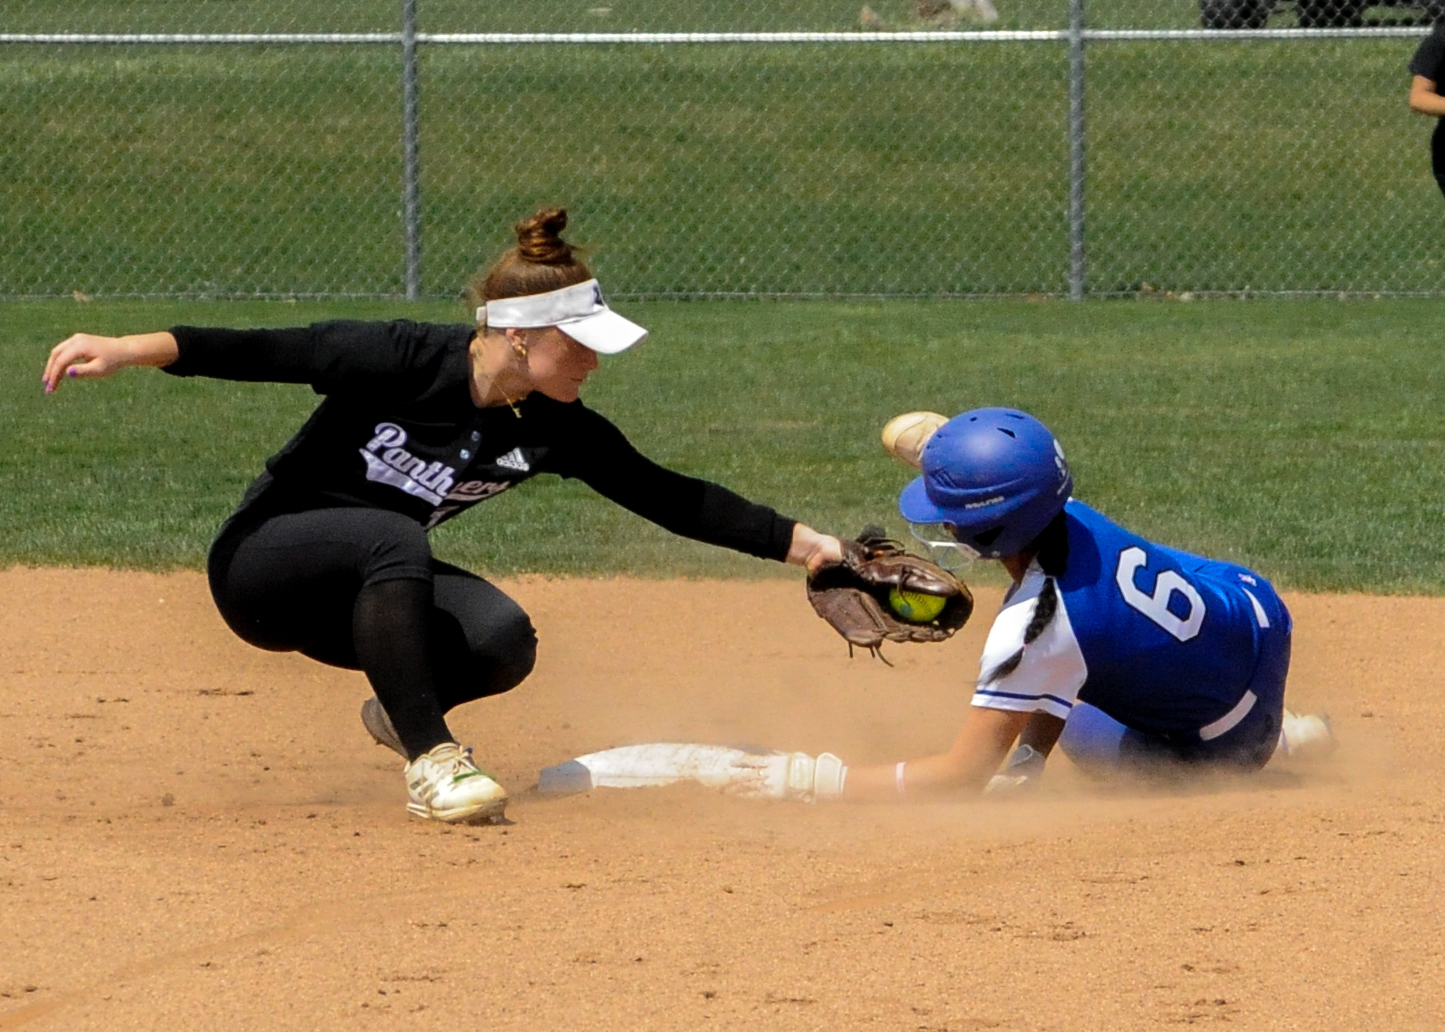 DMACC softball team takes out second-seeded Louisburg College, 2-1, in NJCAA Division II Softball World Series